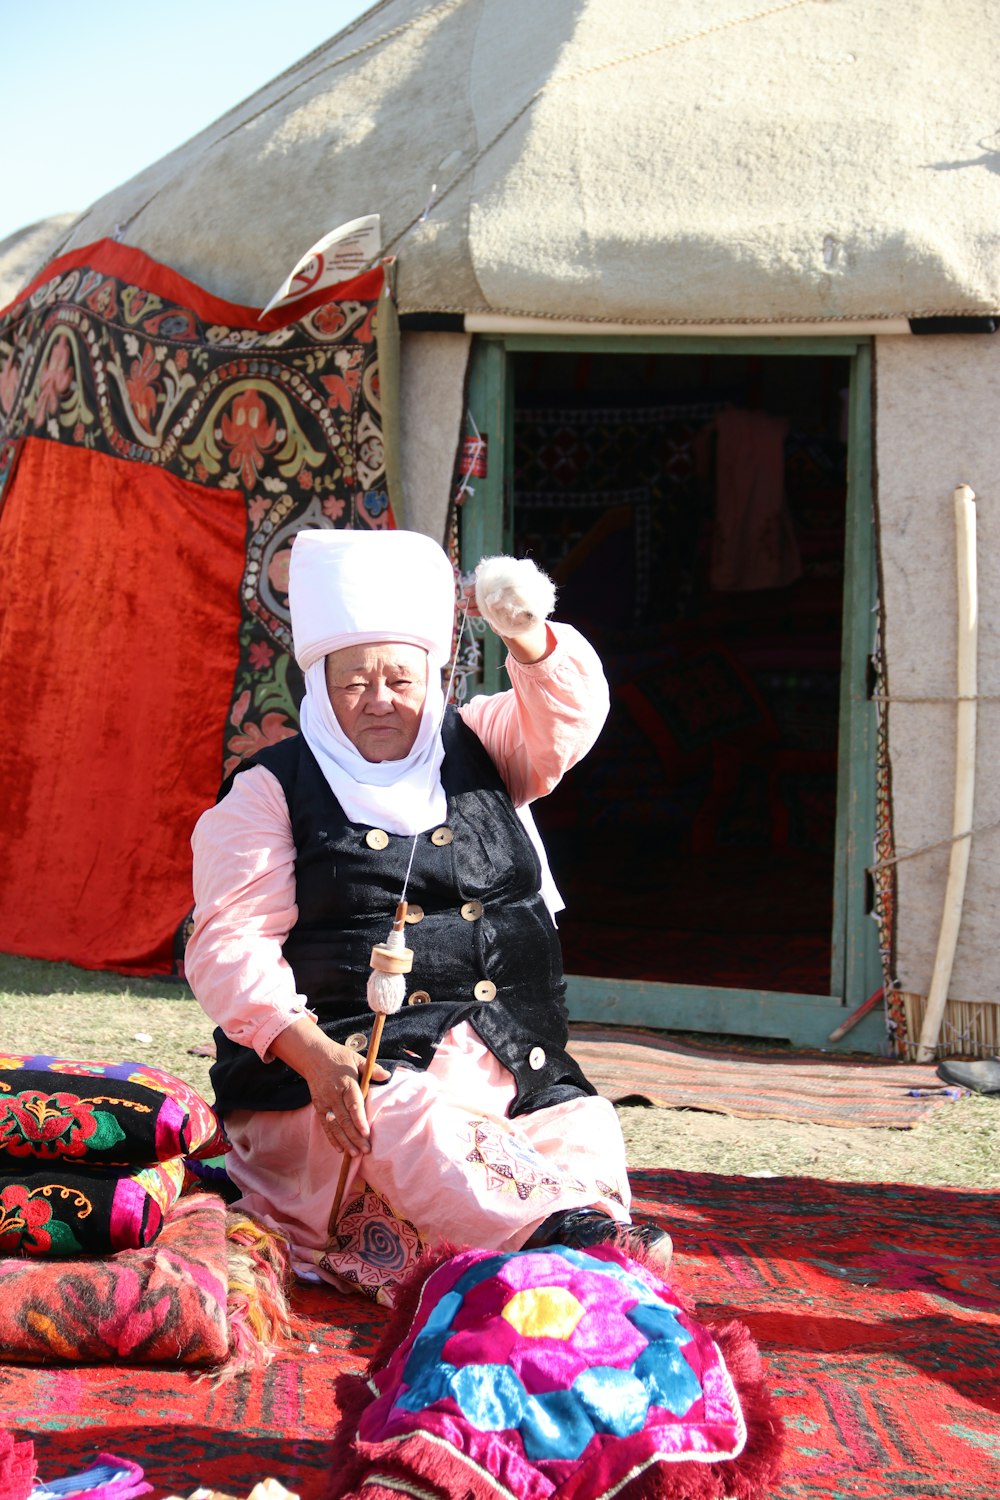 a woman sitting on the ground in front of a tent